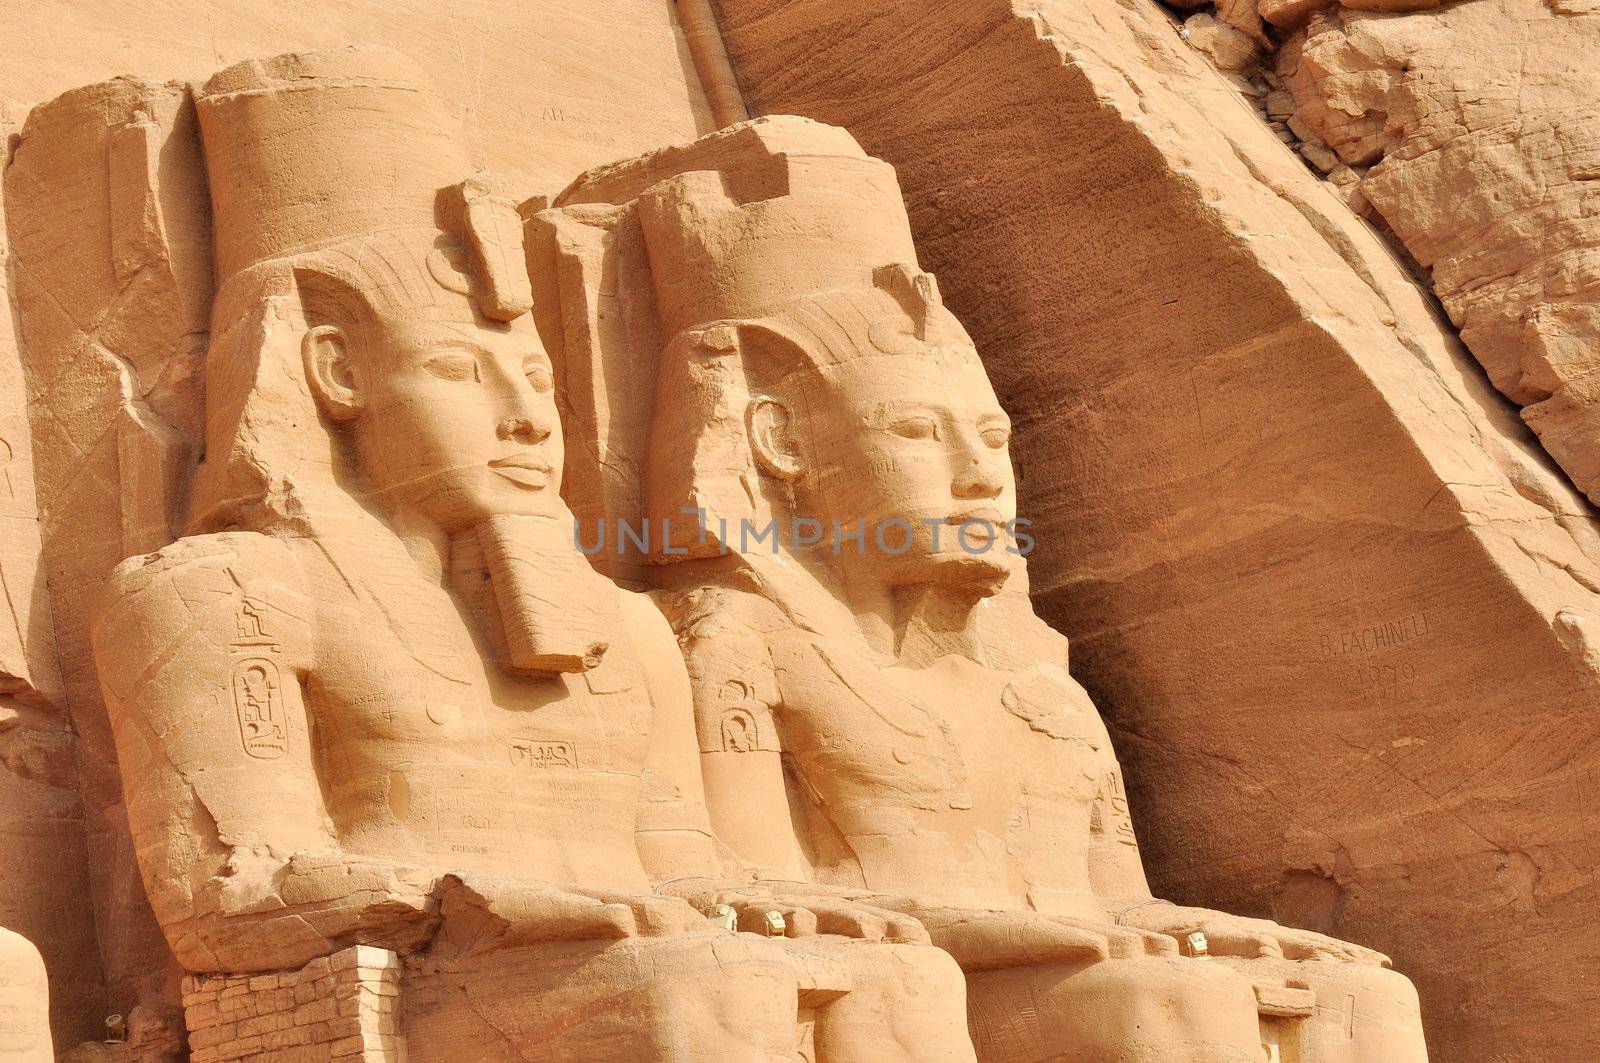 Abu Simbel Great Temple in Egypt by ruigsantos